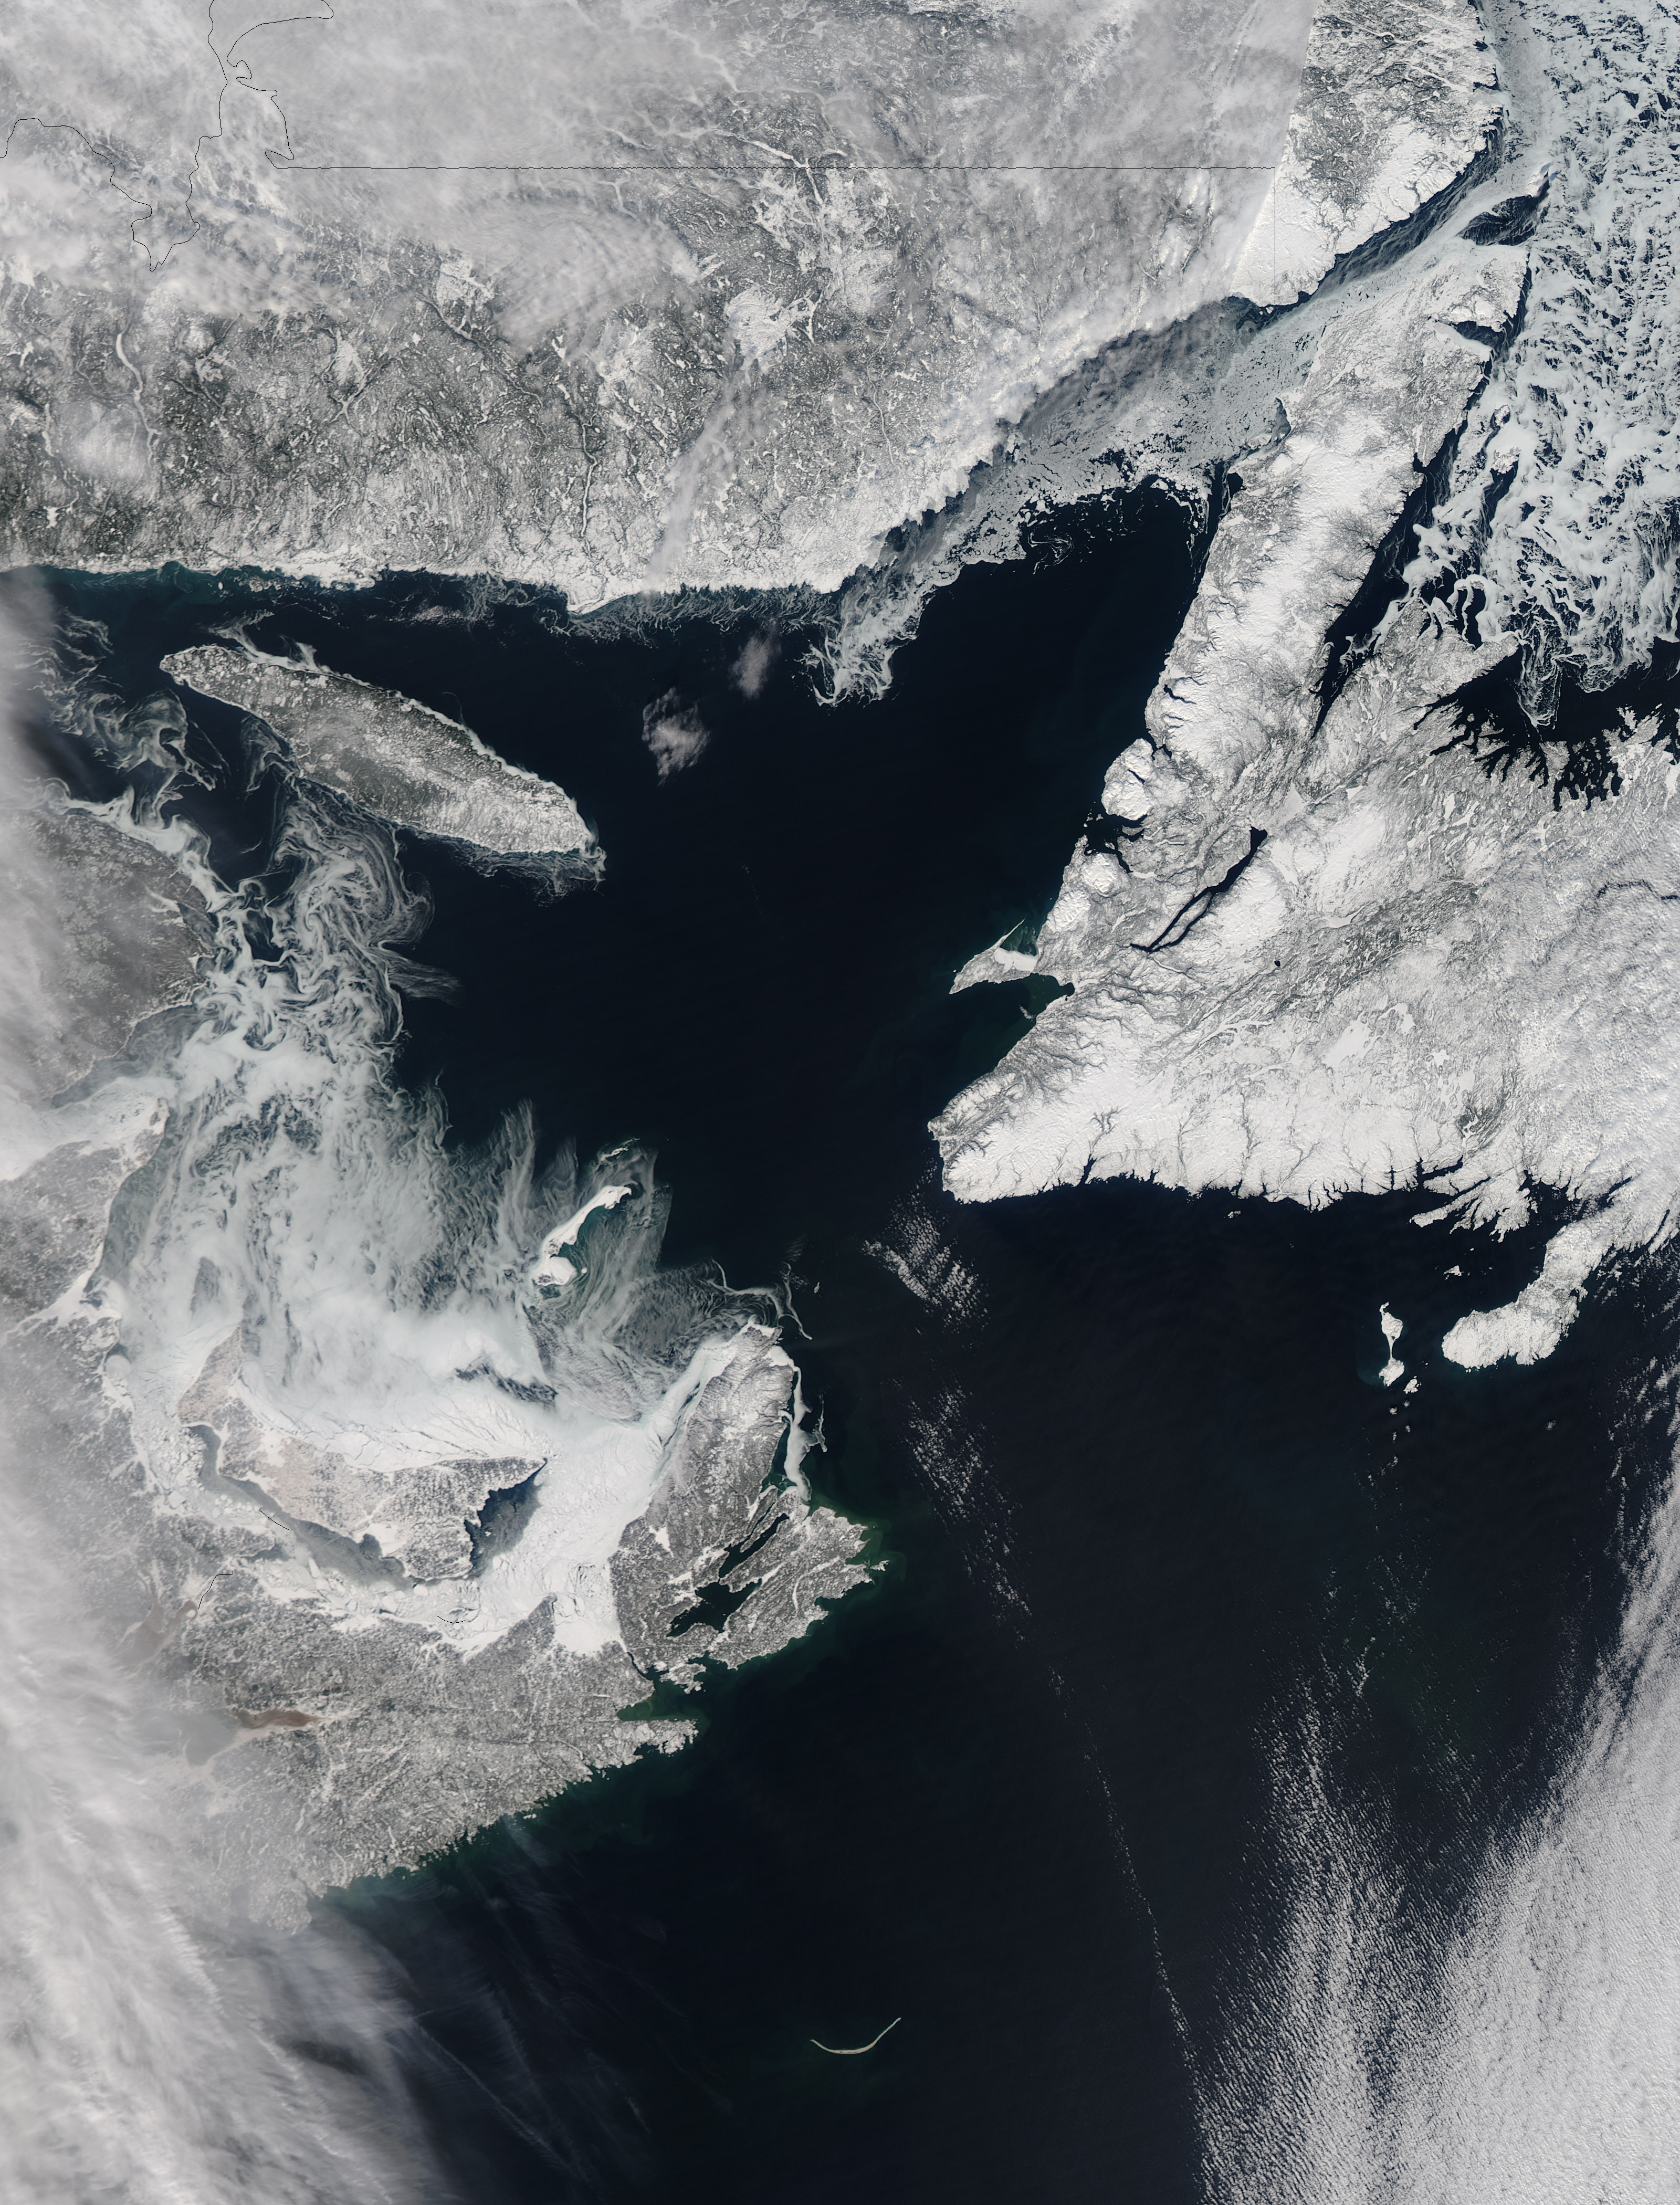 Sea Ice in the Gulf of St. Lawrence